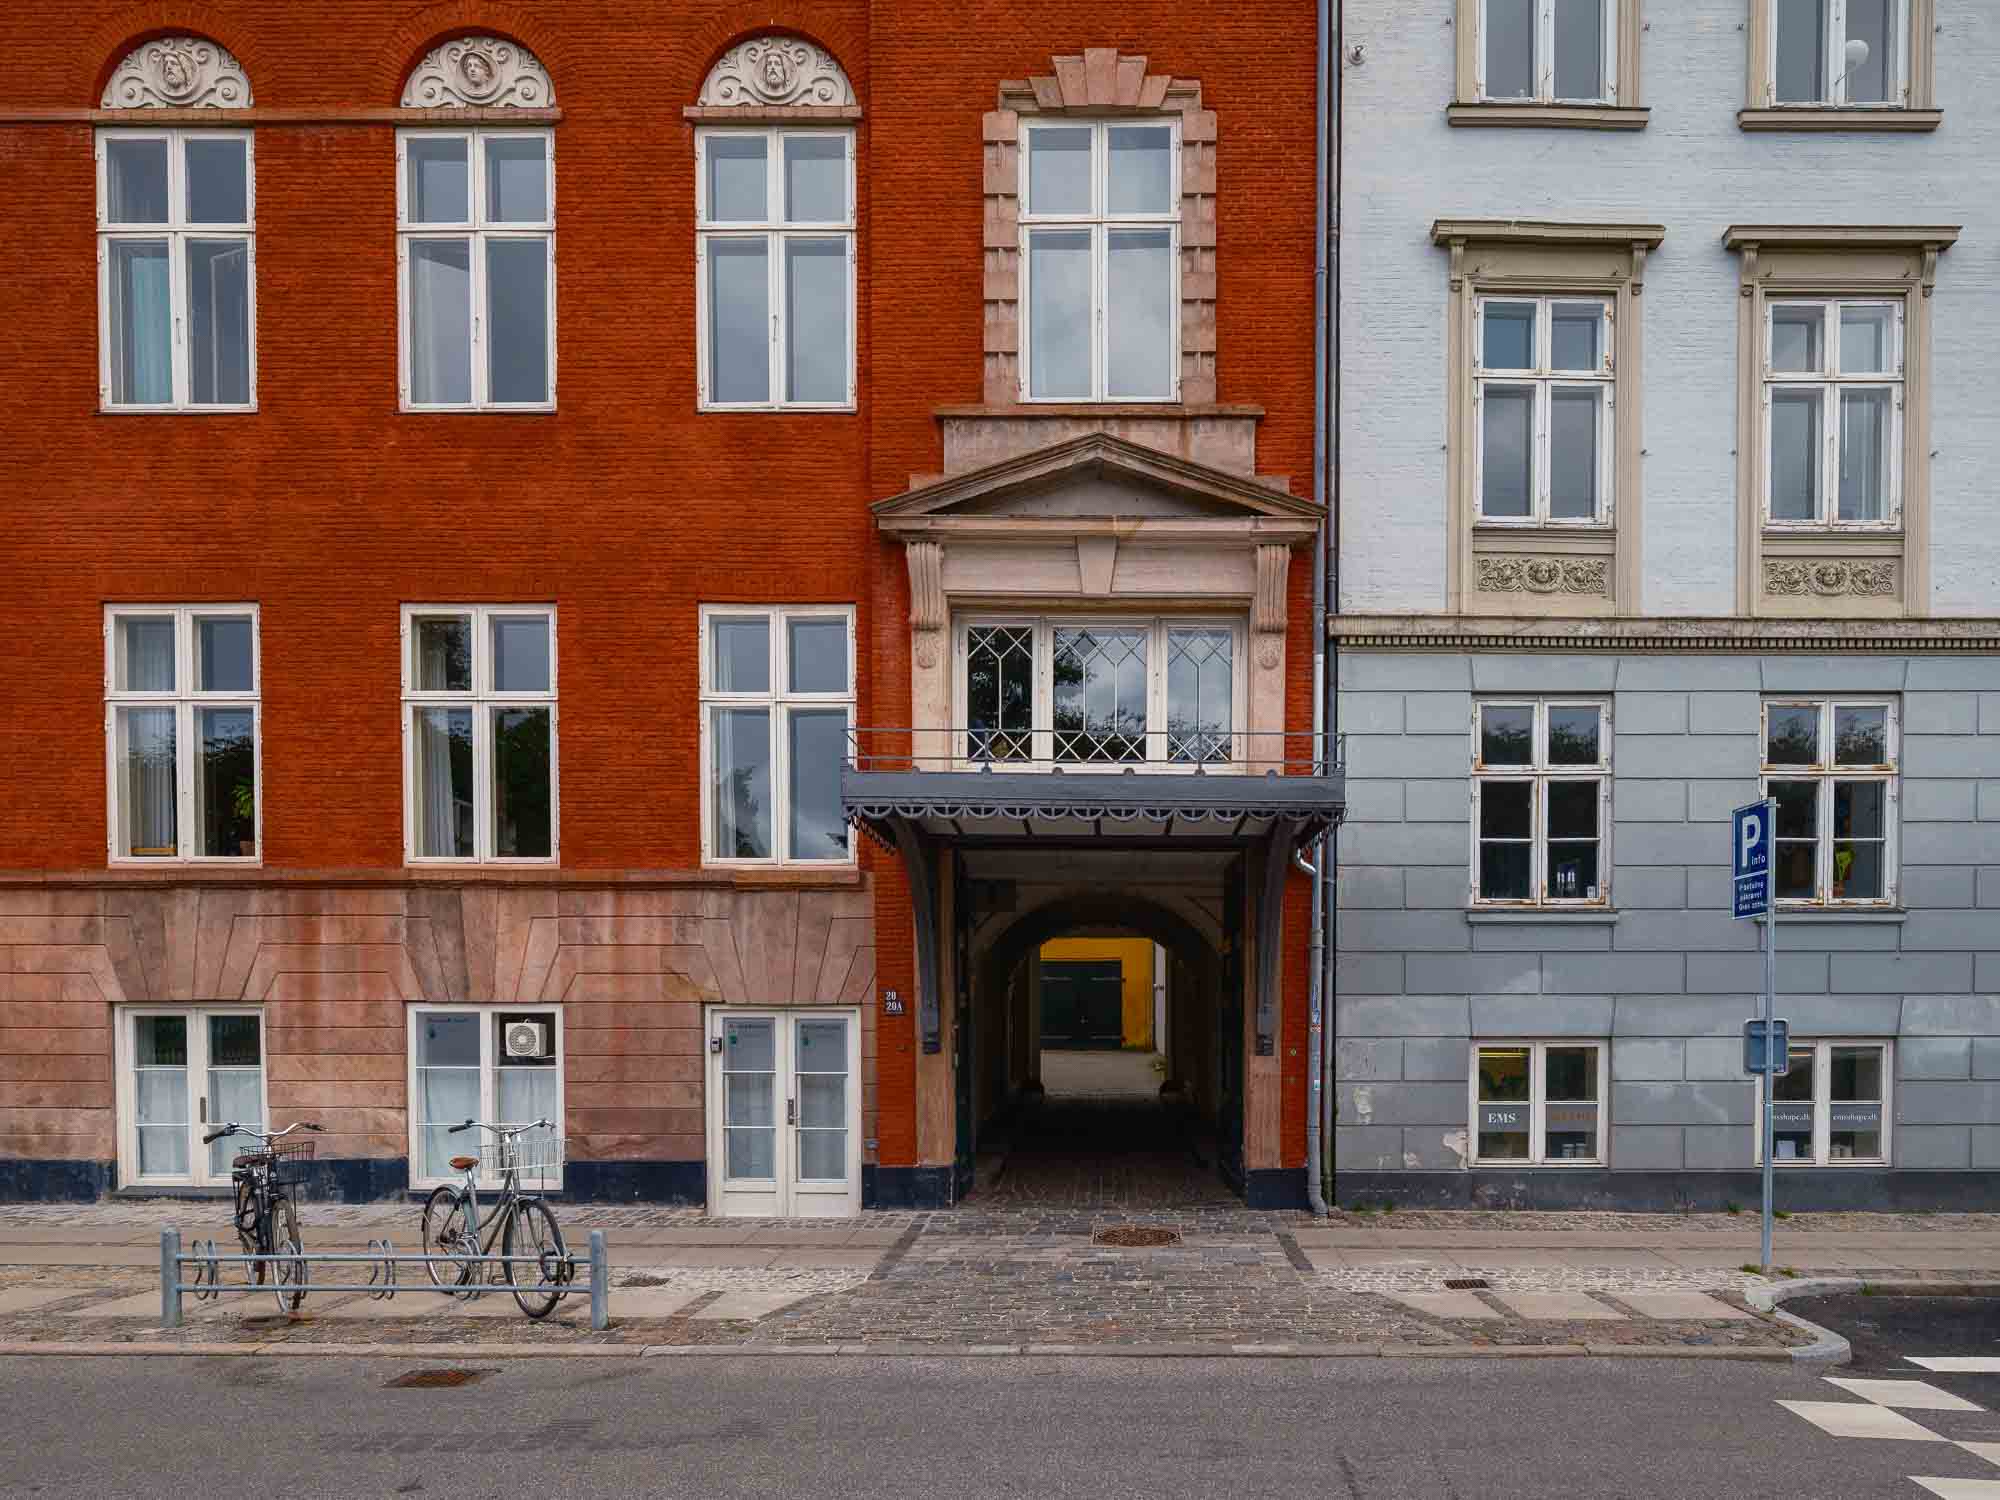 Colorful buildings in Copenhagen with a distinct red facade adjacent to a blue one, featuring a central archway leading to a hidden courtyard.